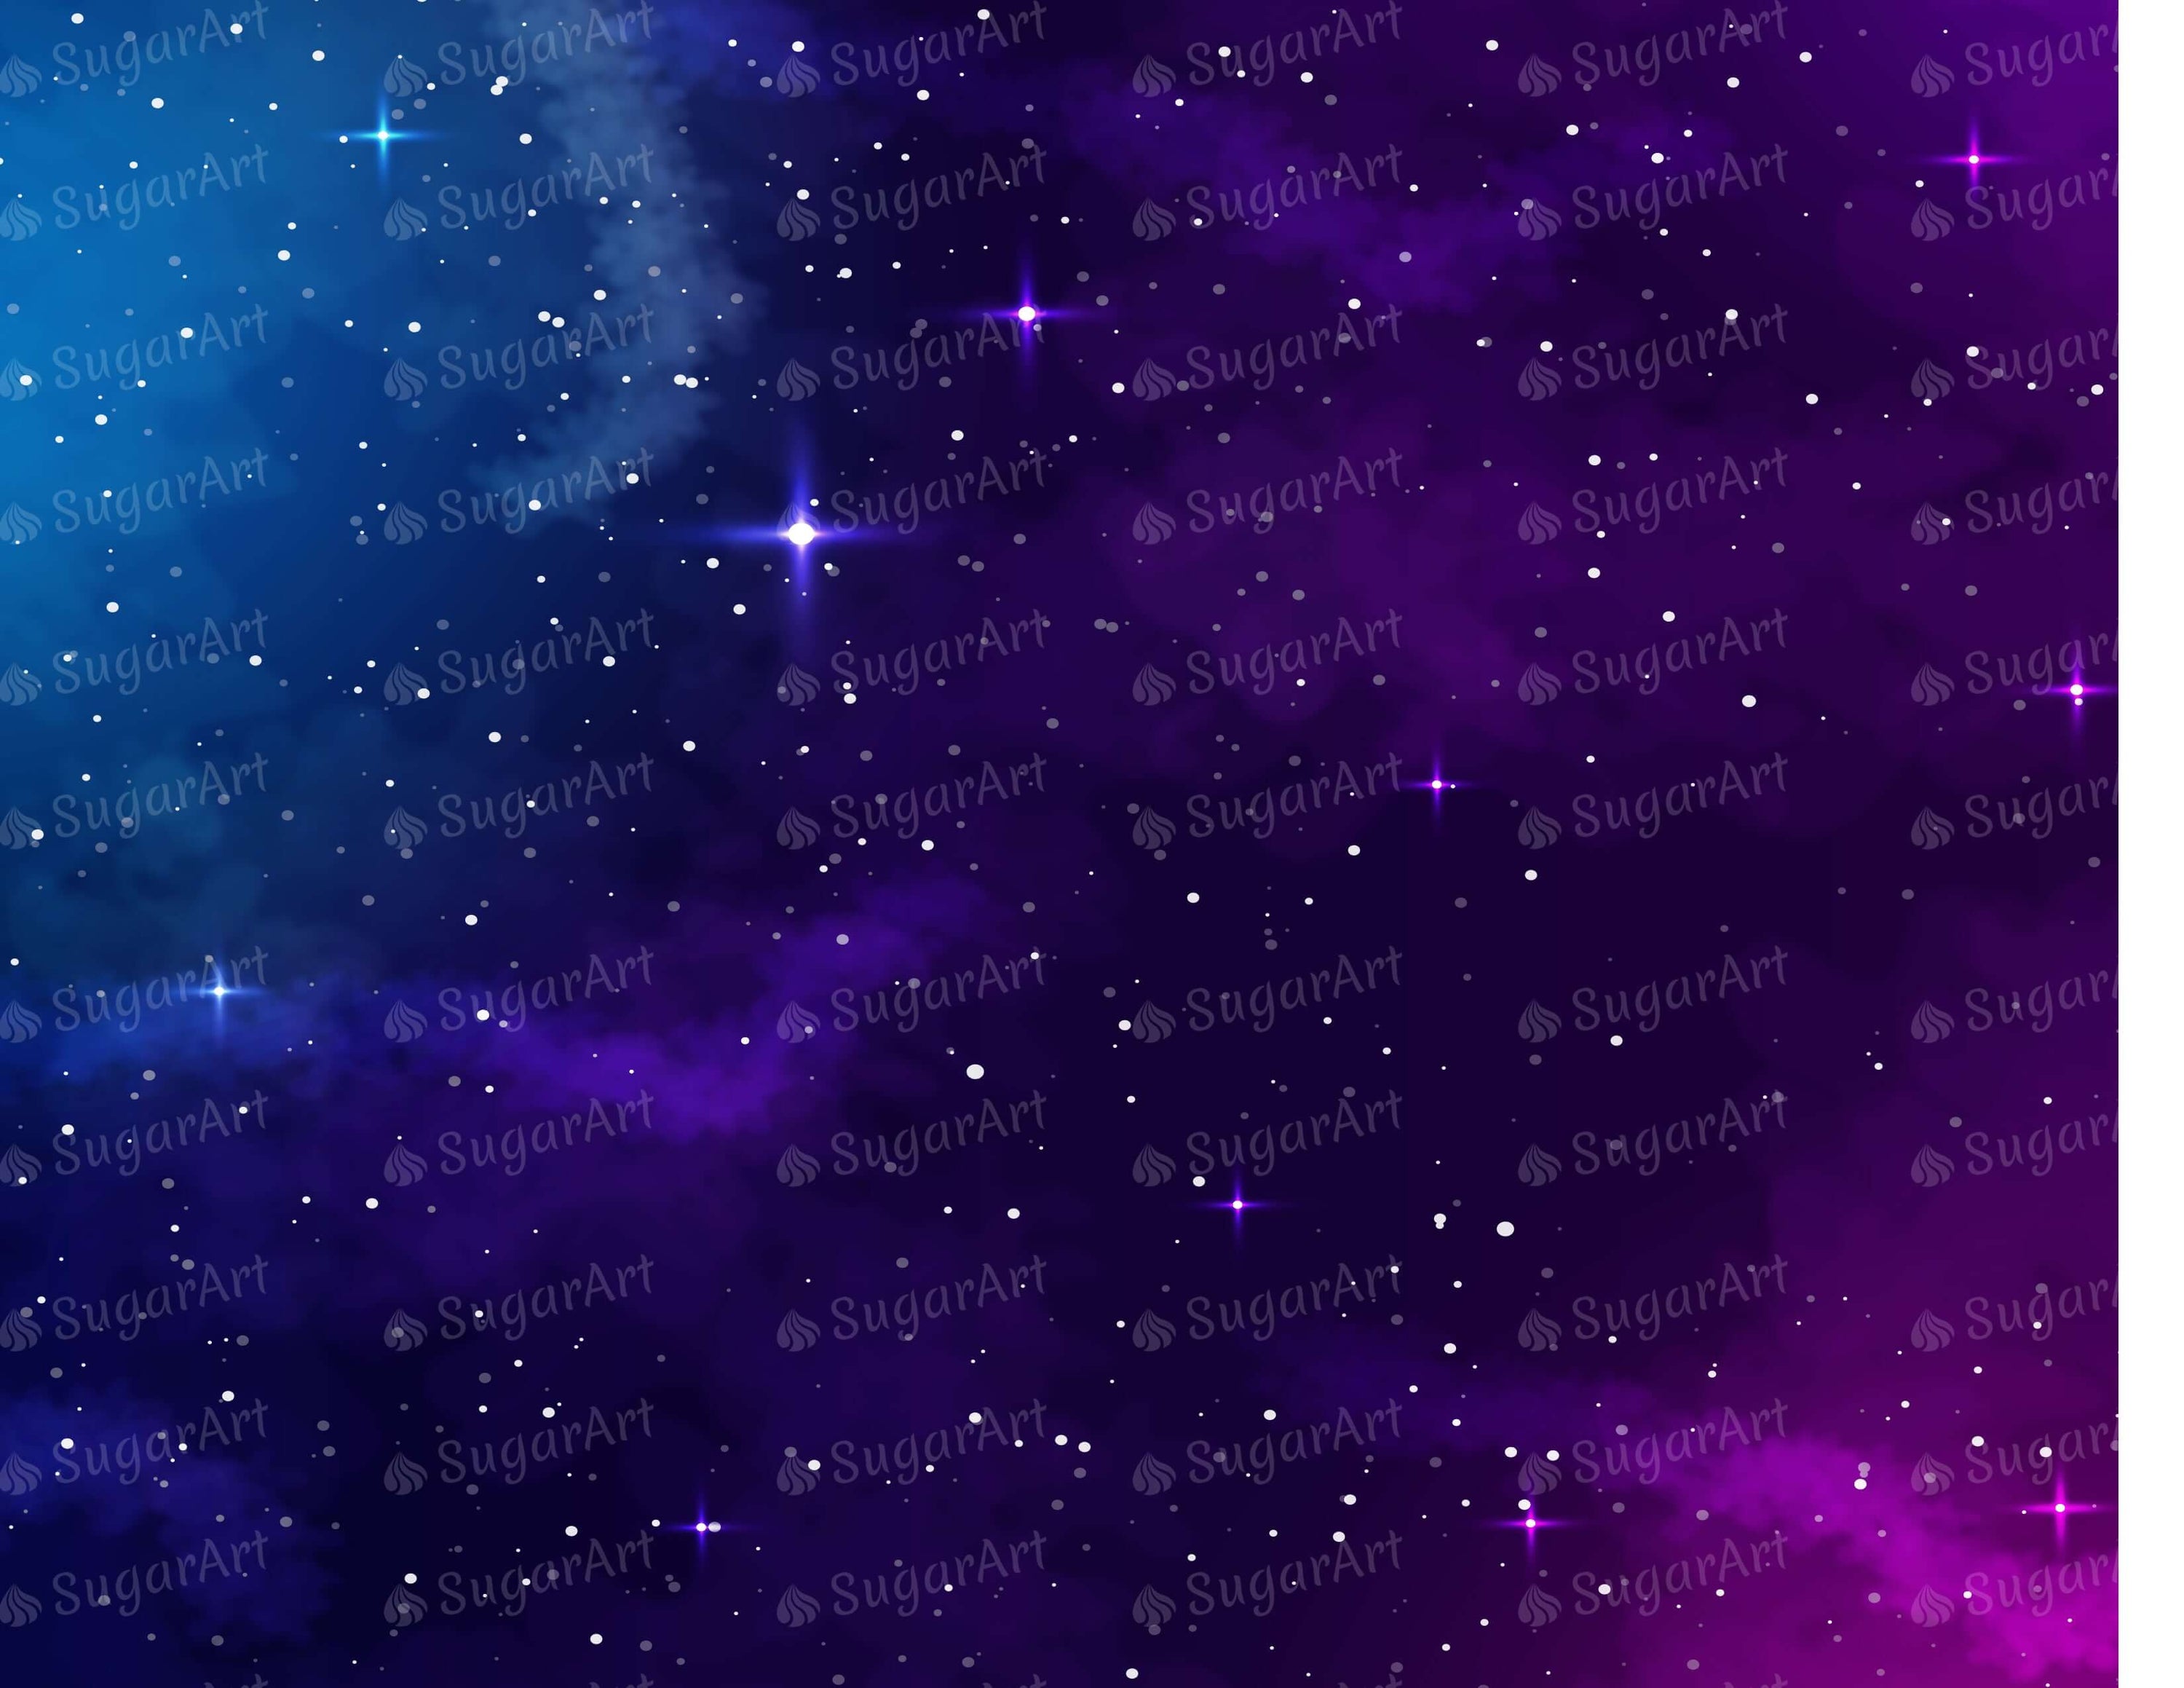 Space Background with Stars - Icing - ISA244.